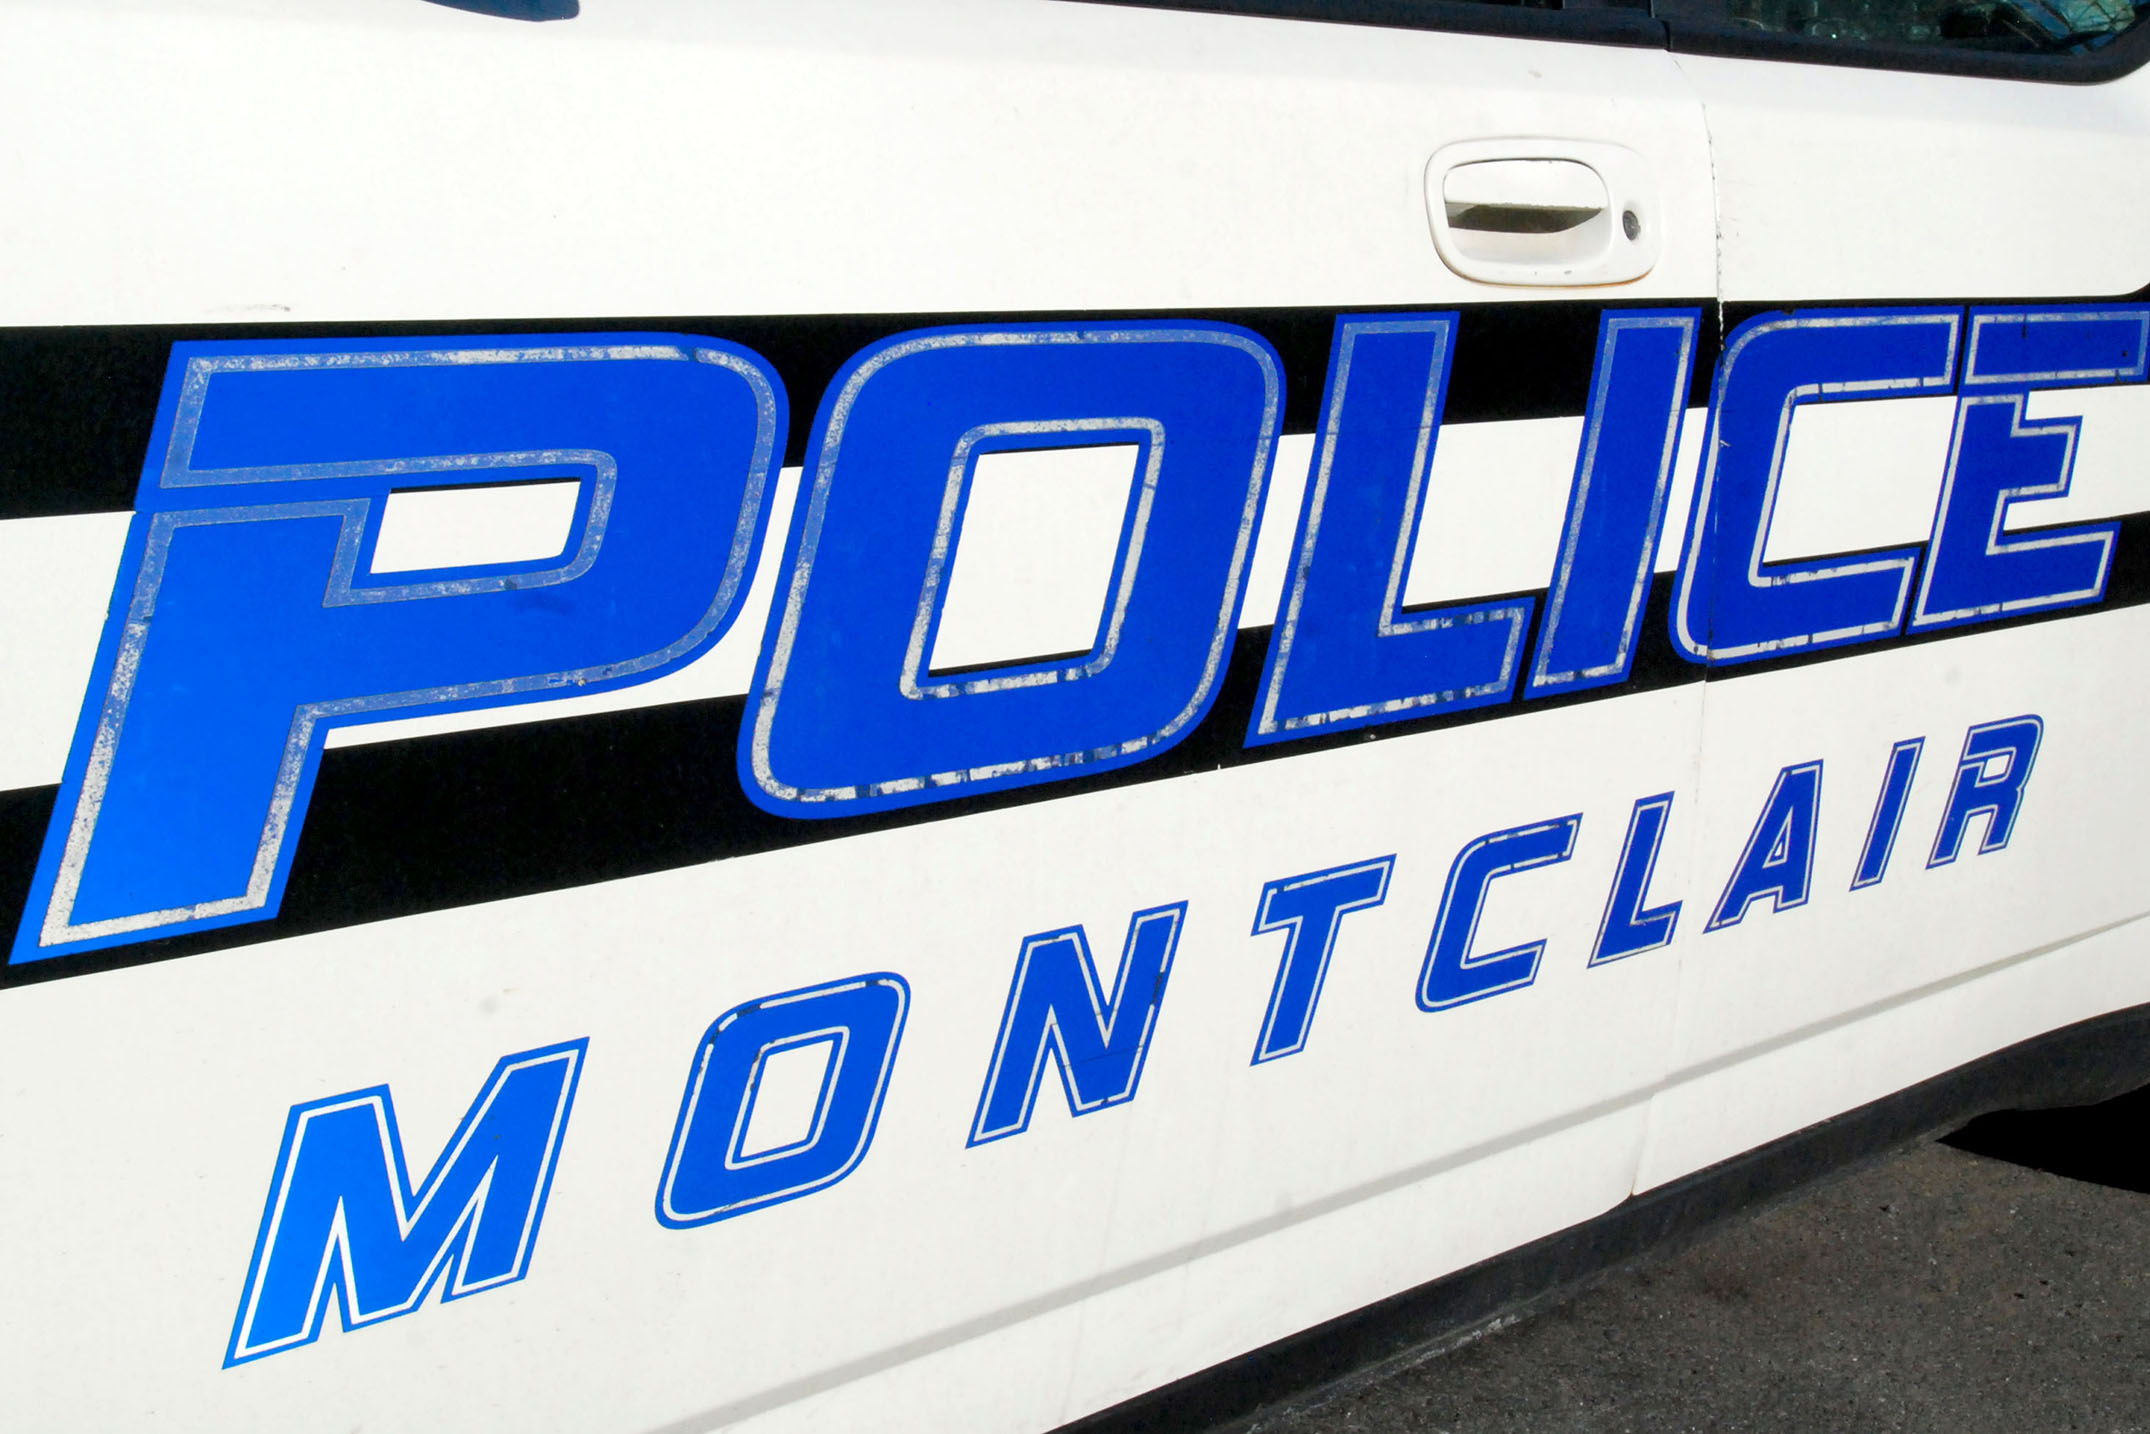 Five arrested following weapons incident at Montclair High School